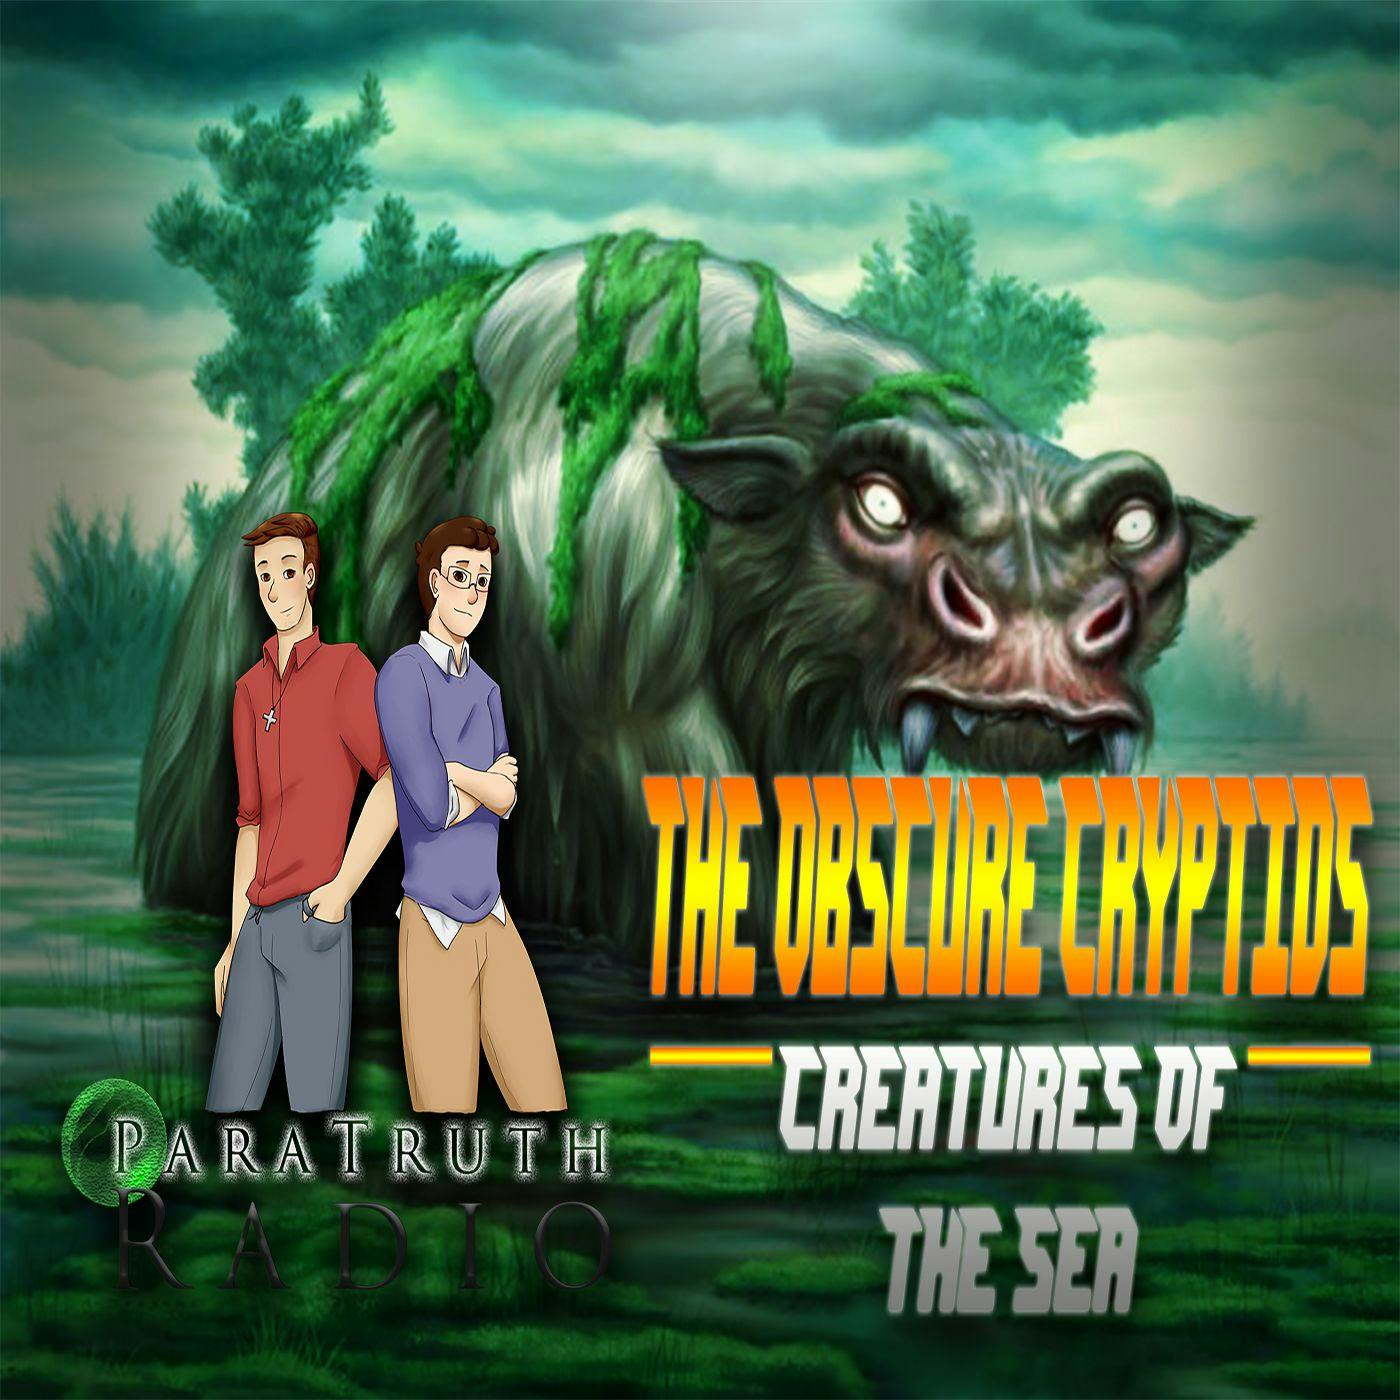 The Obscure Cryptids:  Creatures of the Land Image